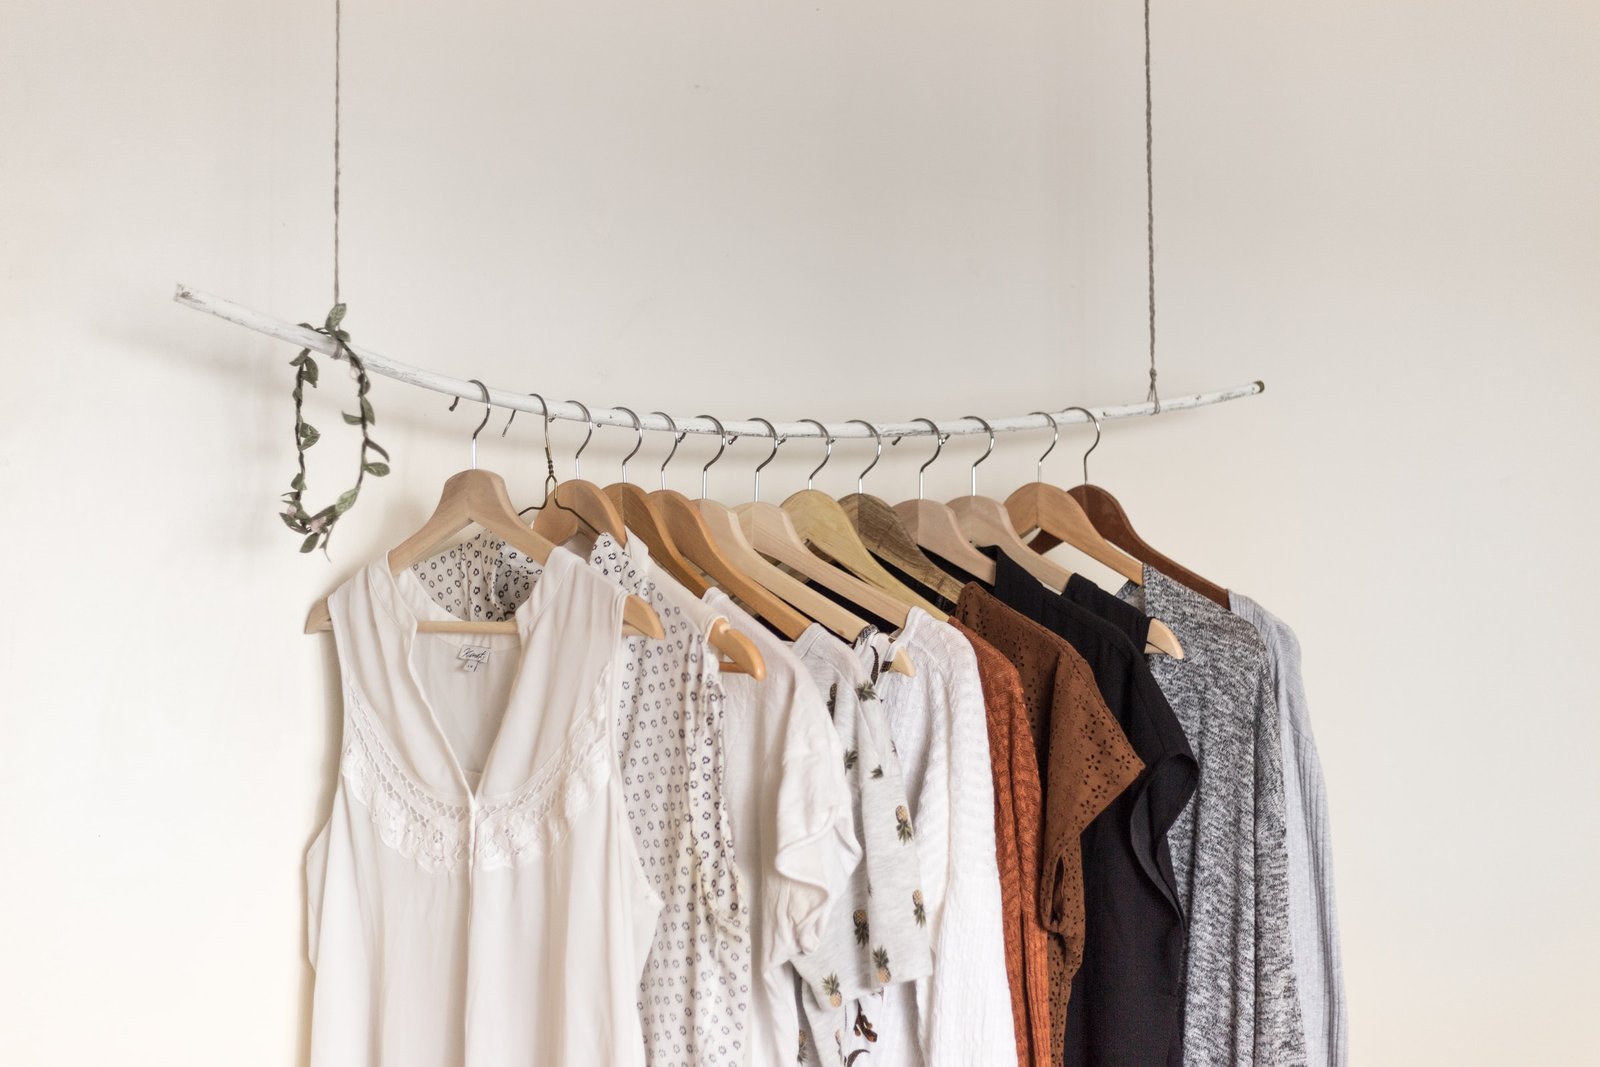 The Closet Diet – Lose Those Unwanted Pounds of Clothes, Now!